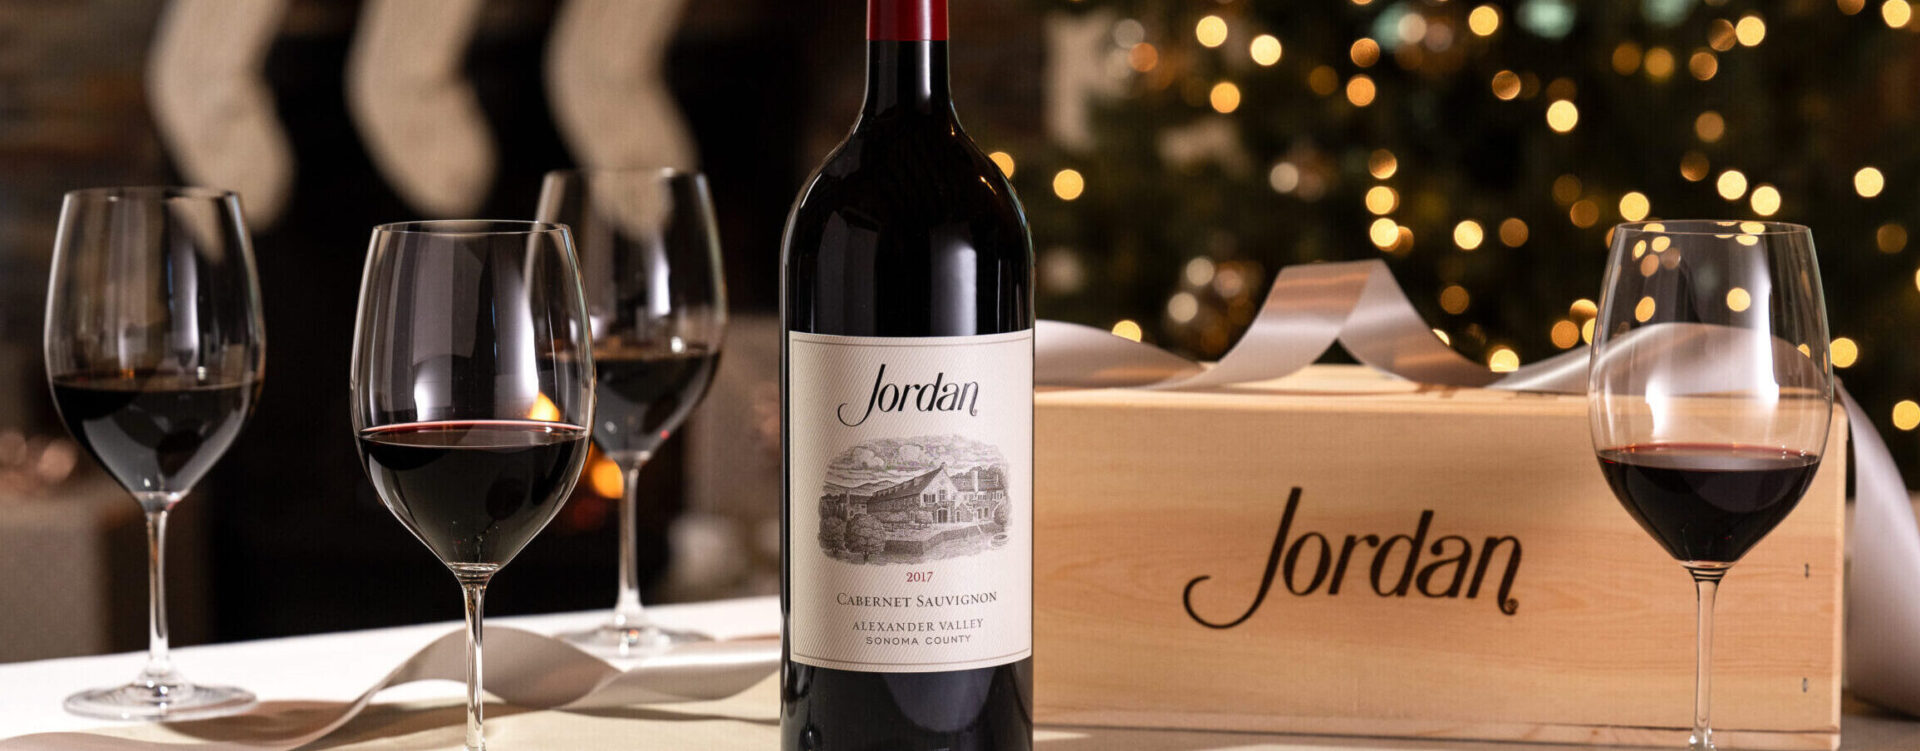 cabernet sauvignon bottle with wooden wine box and wine glasses on table with christmas tree and stockings in the background